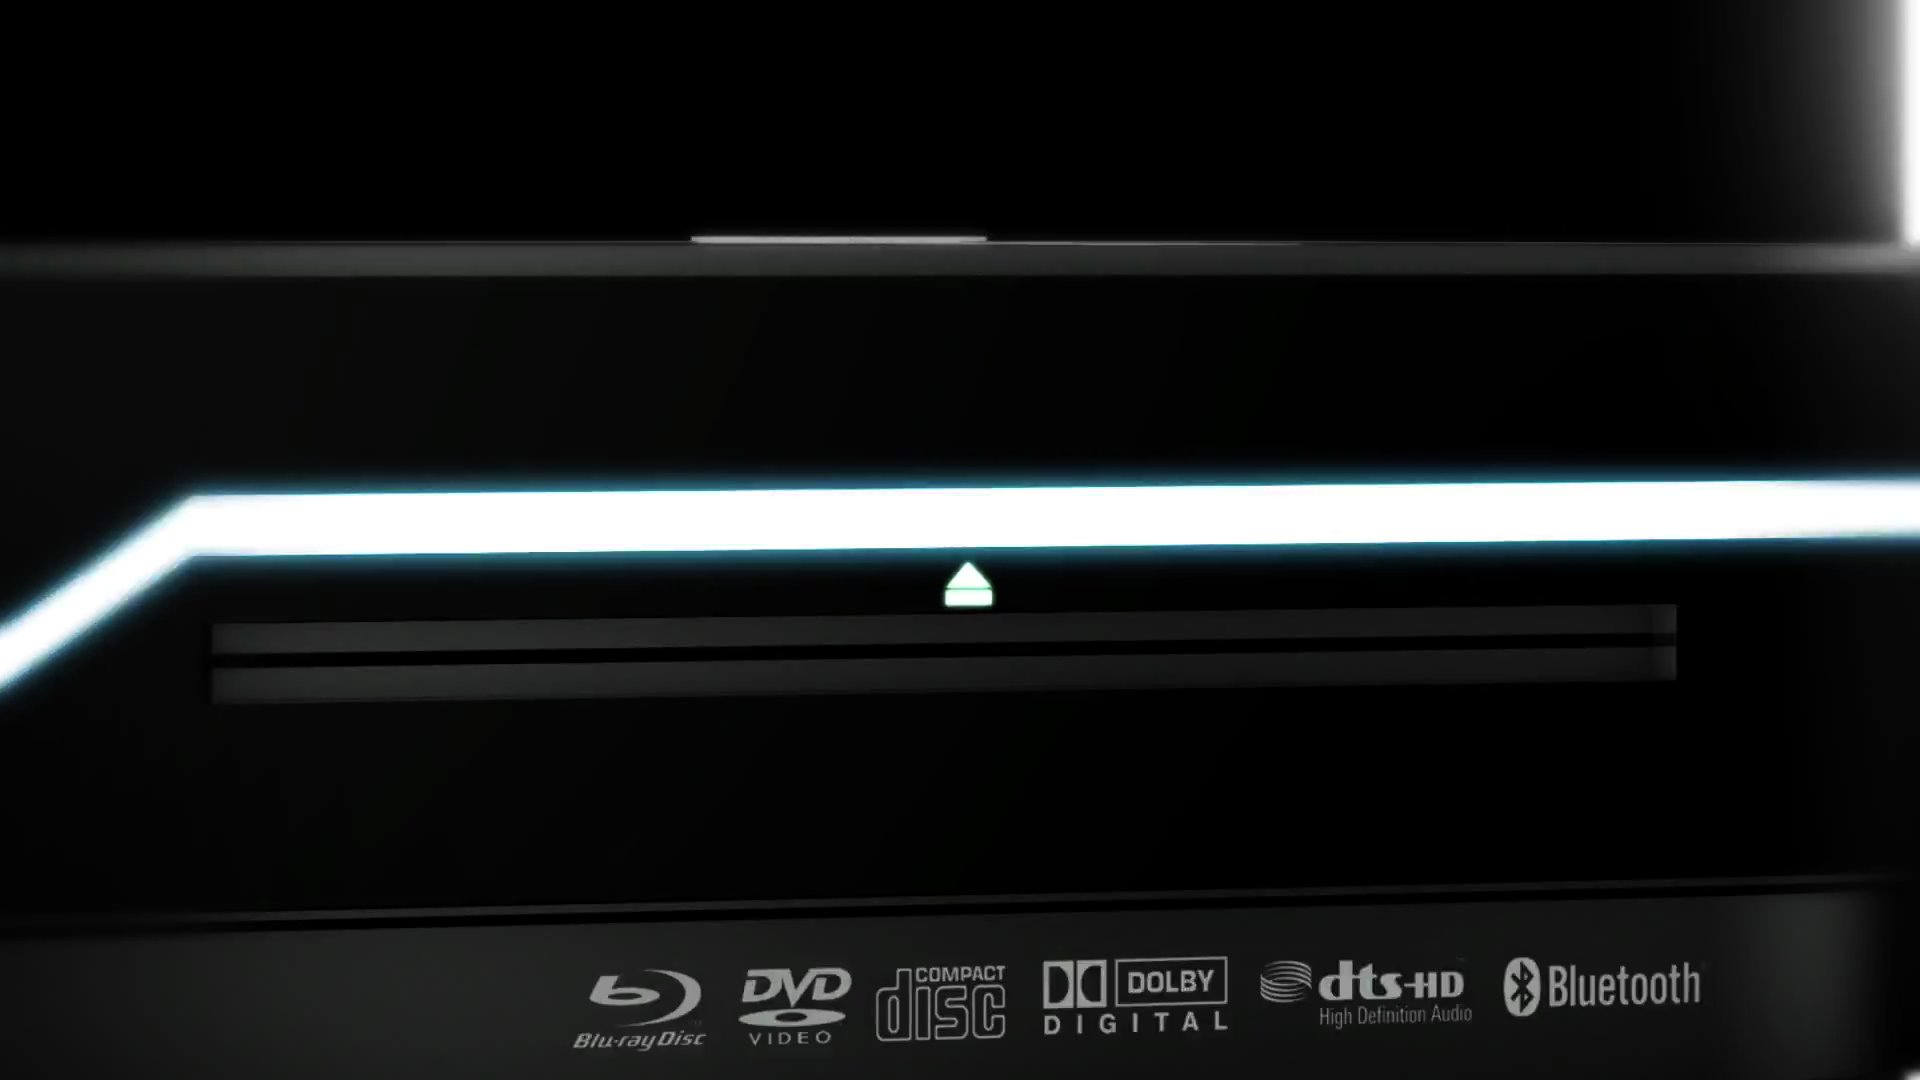 That Cool ‘PS4 Teaser’ Is A Fake, Sony Says